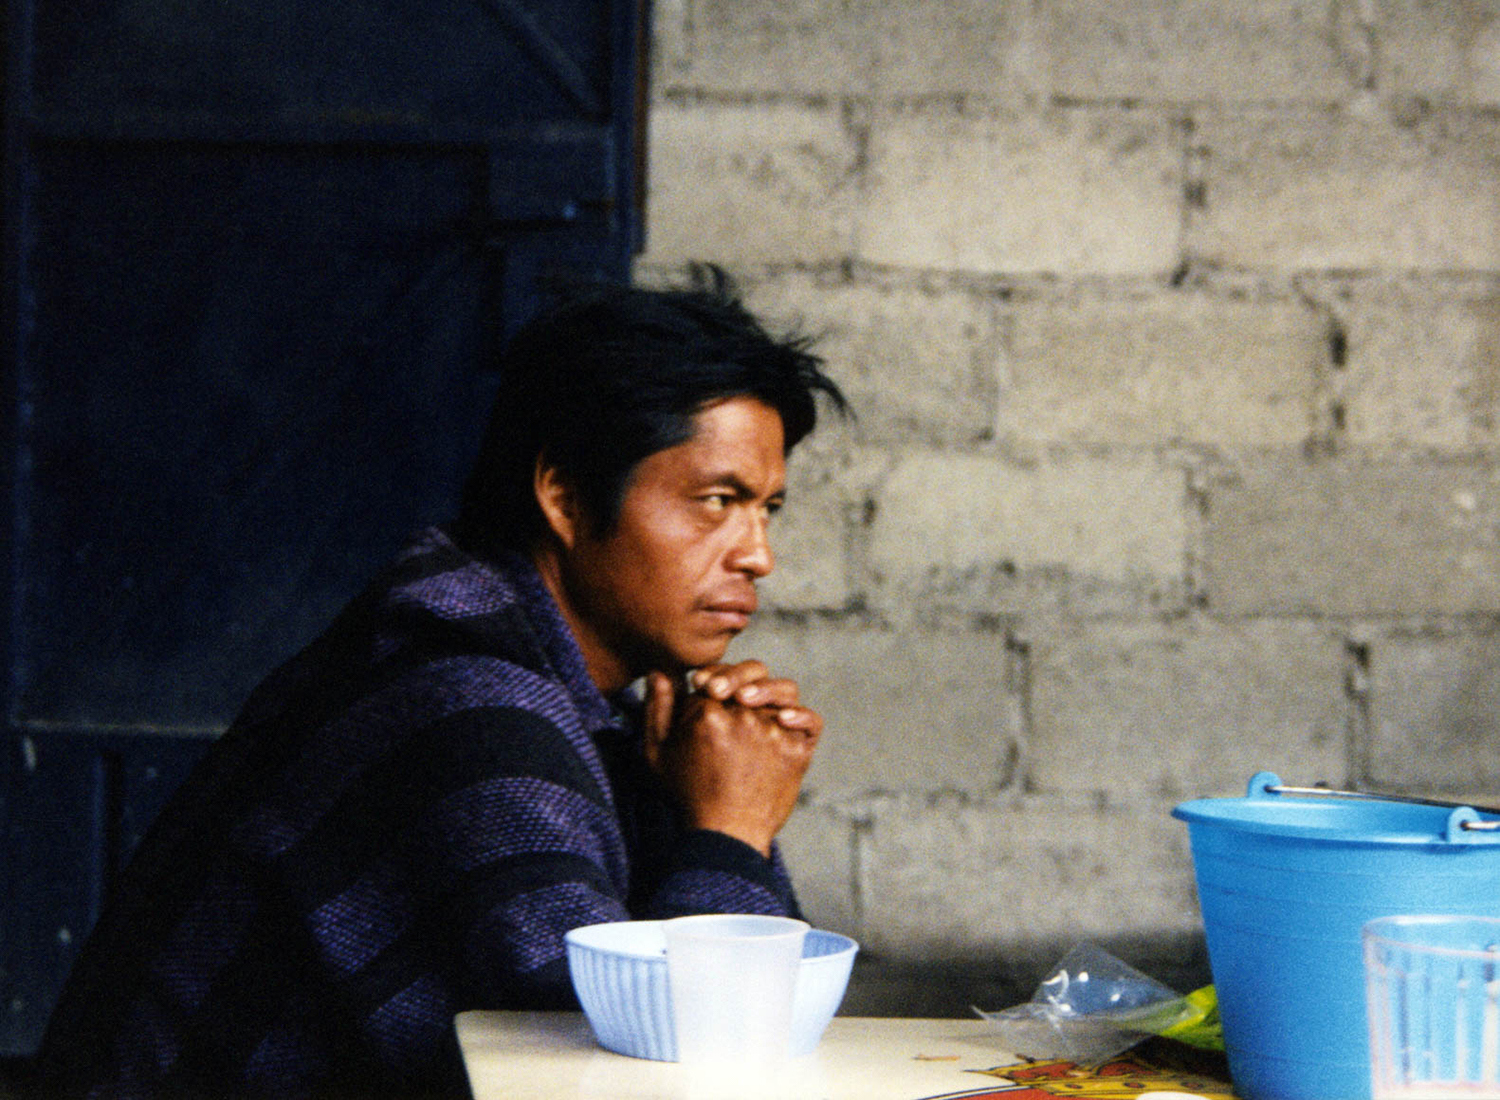 <p>A man thinks while drinking pulque, a traditional Mesoamerican indigenous drink made from the maguey plant.</p>